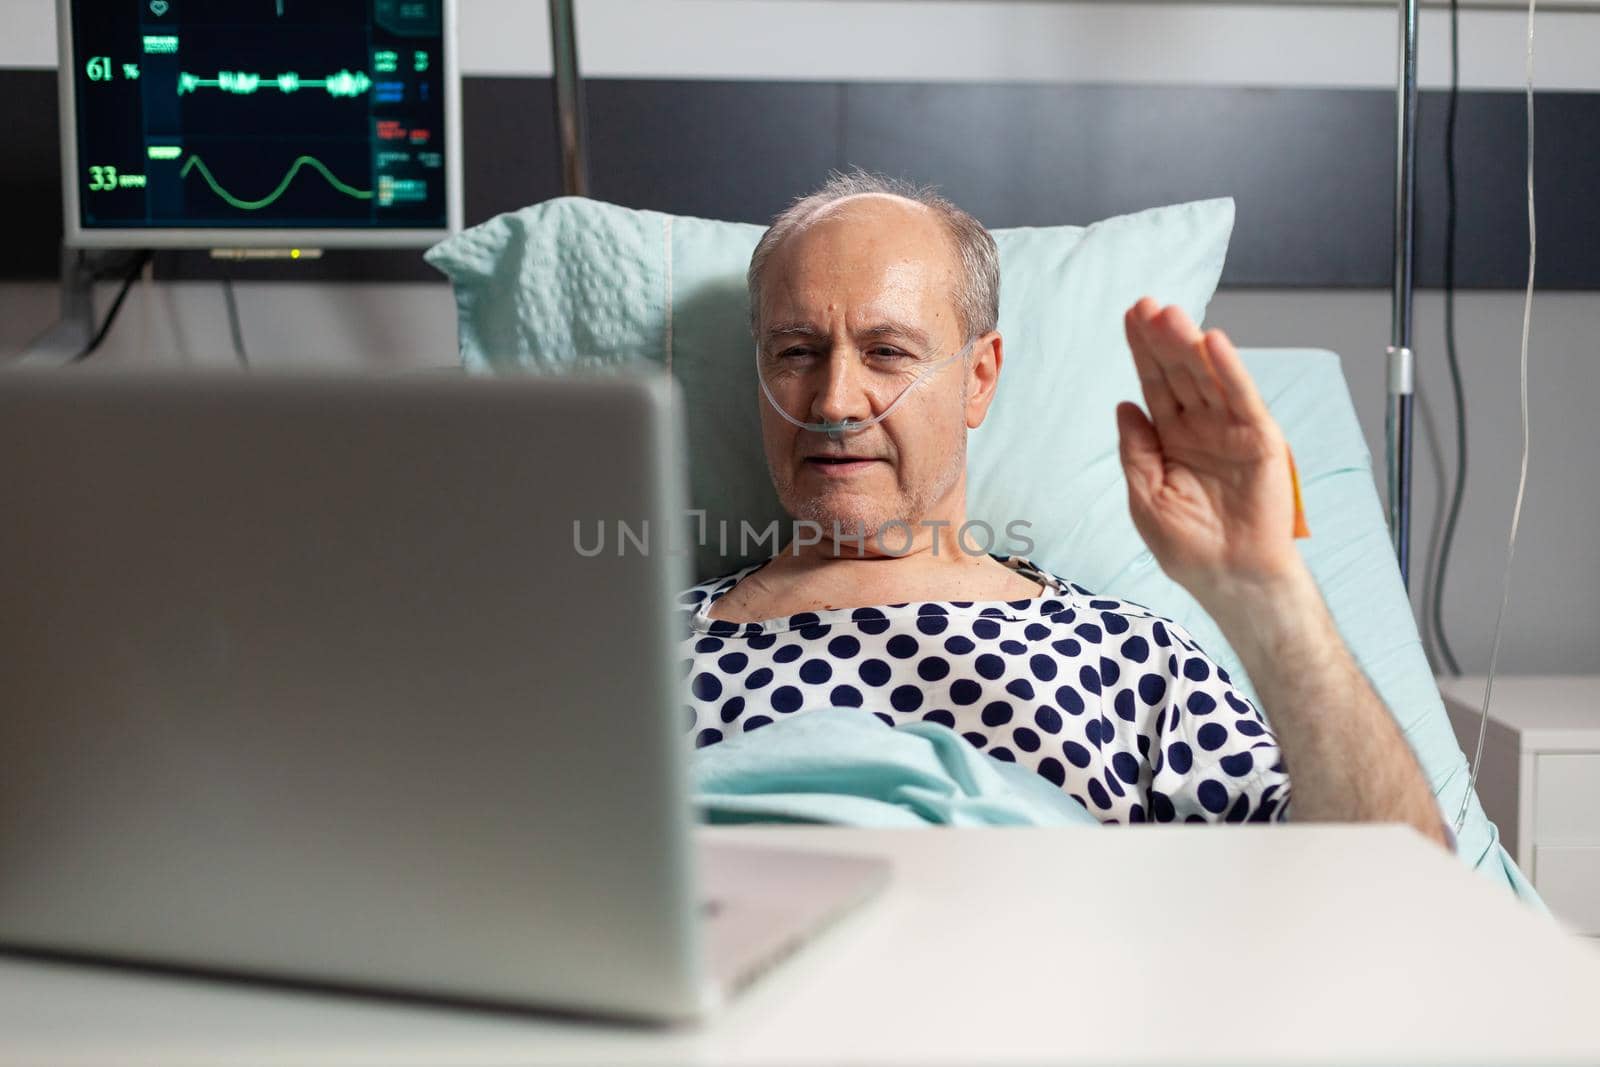 Cheerful sick senior man waving at camera during video conference using laptop laying in bed, breathing through oxygen tube. Man recovering after surgery and treatment.